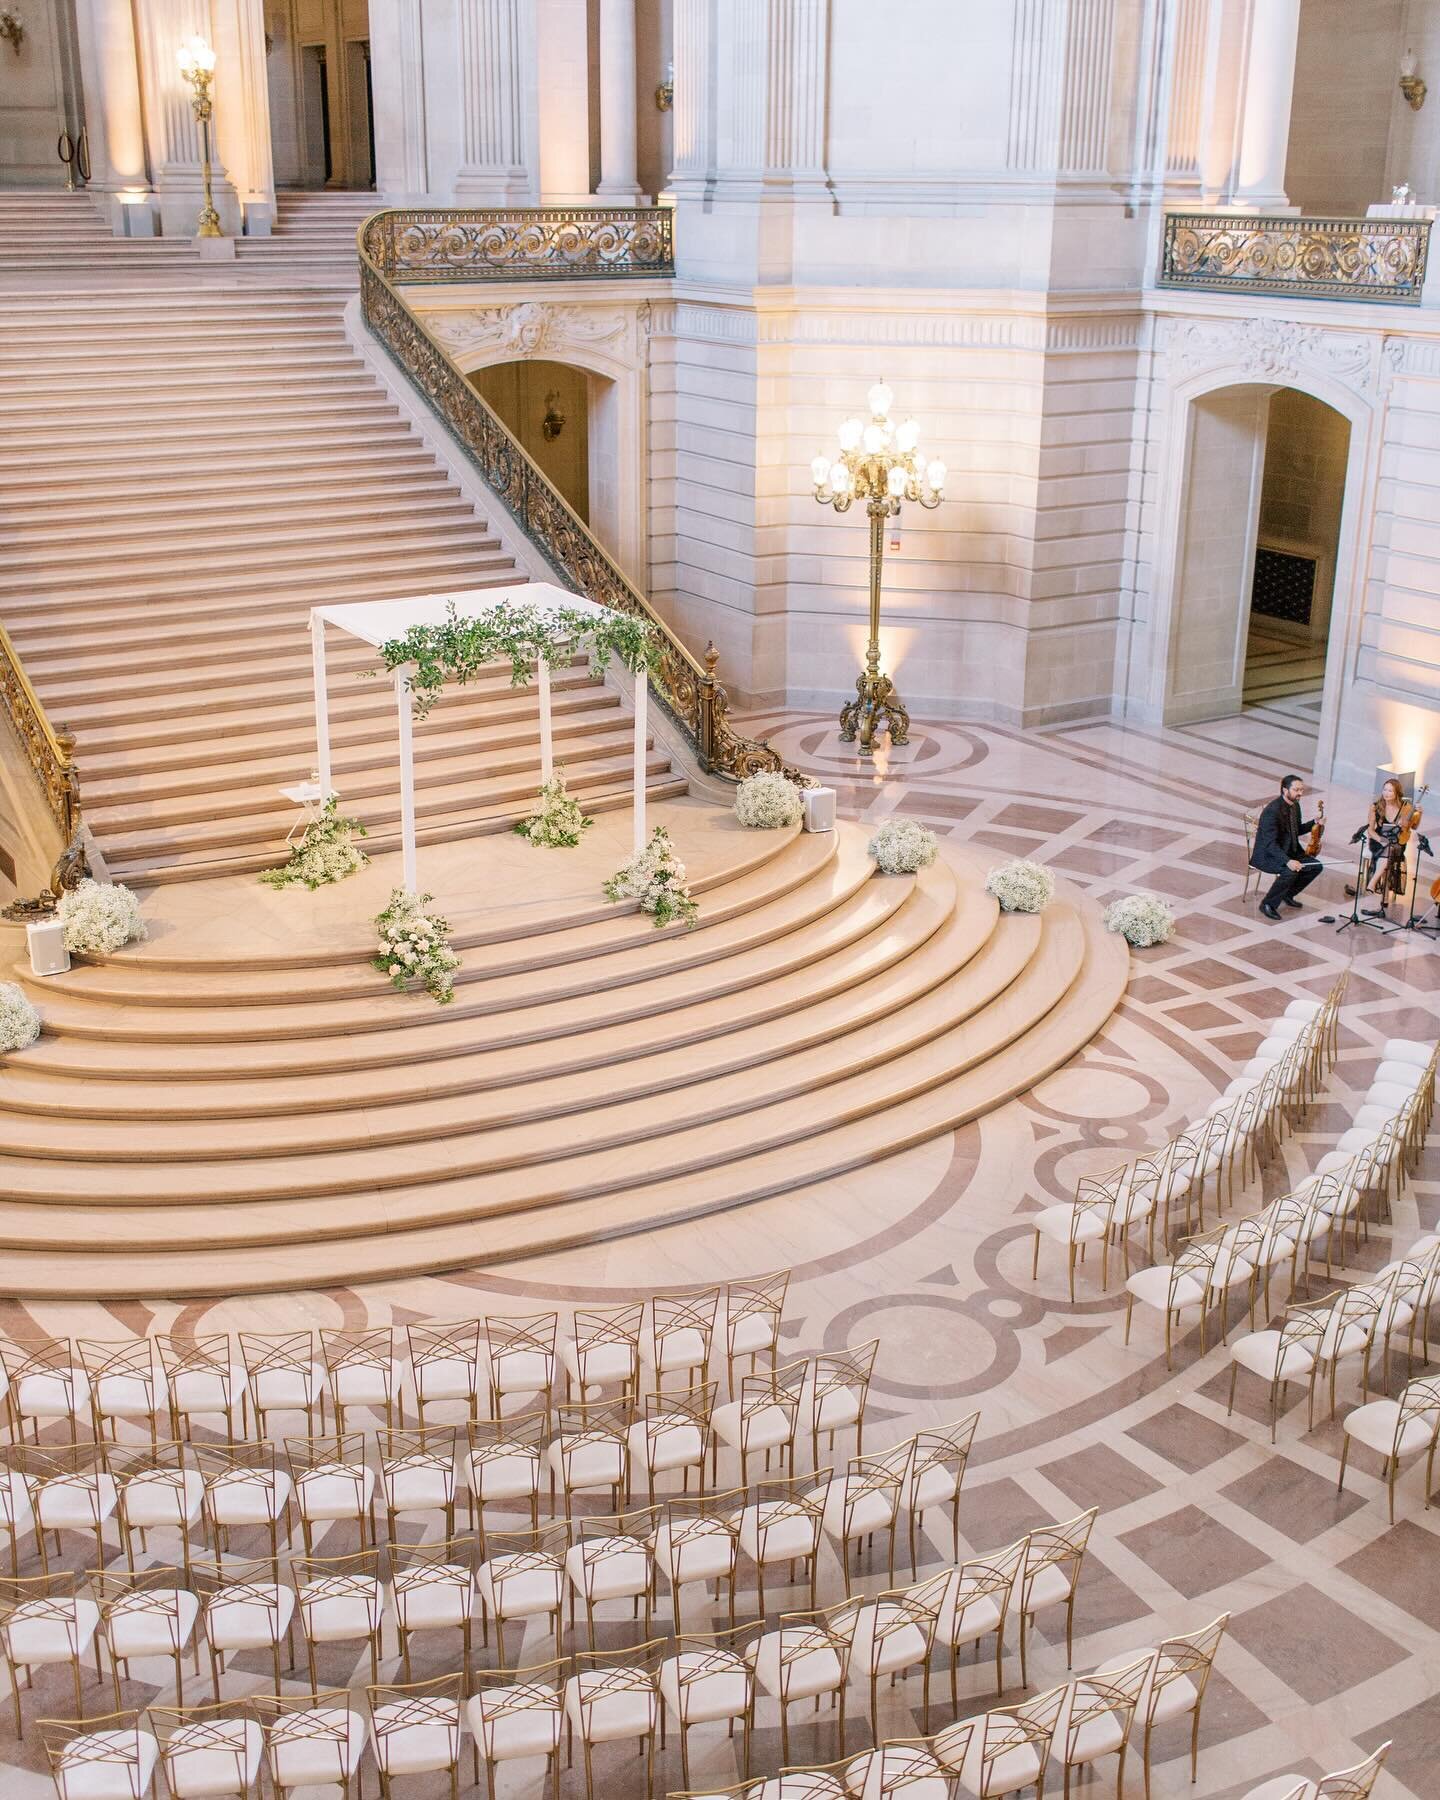 I spy with my little eye a string trio (minus the cello) in the midst of the dreamiest and most elegant wedding scene. 
.
.
Dream team: 
Planning &amp; Design: @daldevents, Photography: @theganeys, Venue: #sfcityhall, Floral design: @soulflowerdesign